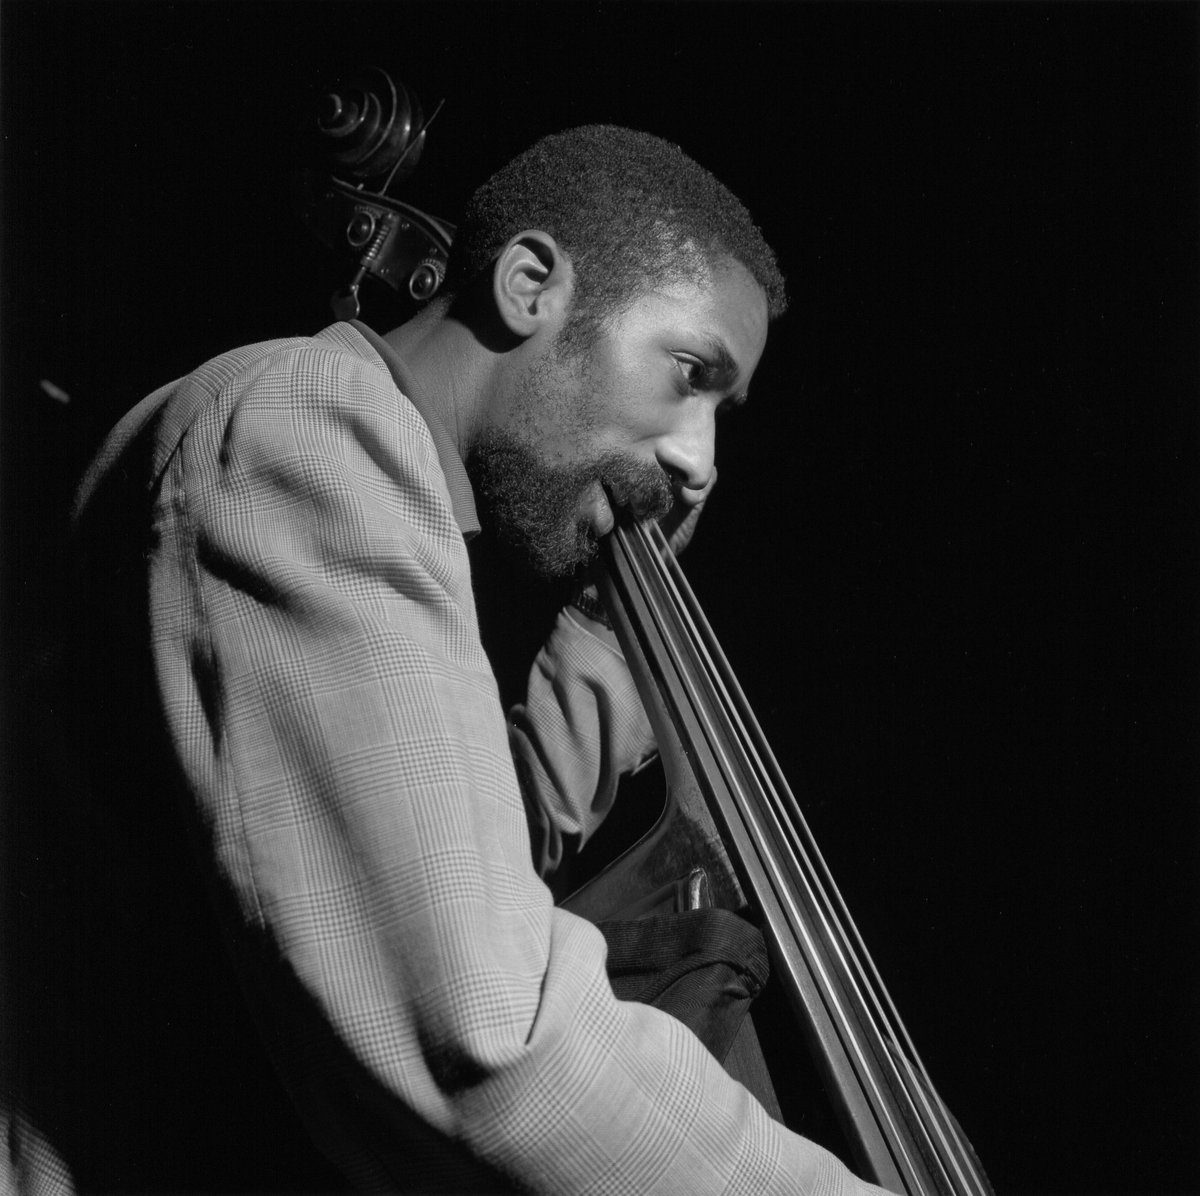 Happy Birthday, Ron Carter! The legendary bassist is 87 years old today. Here he is at the recording session for Sam Rivers' 'Contours' in 1965.